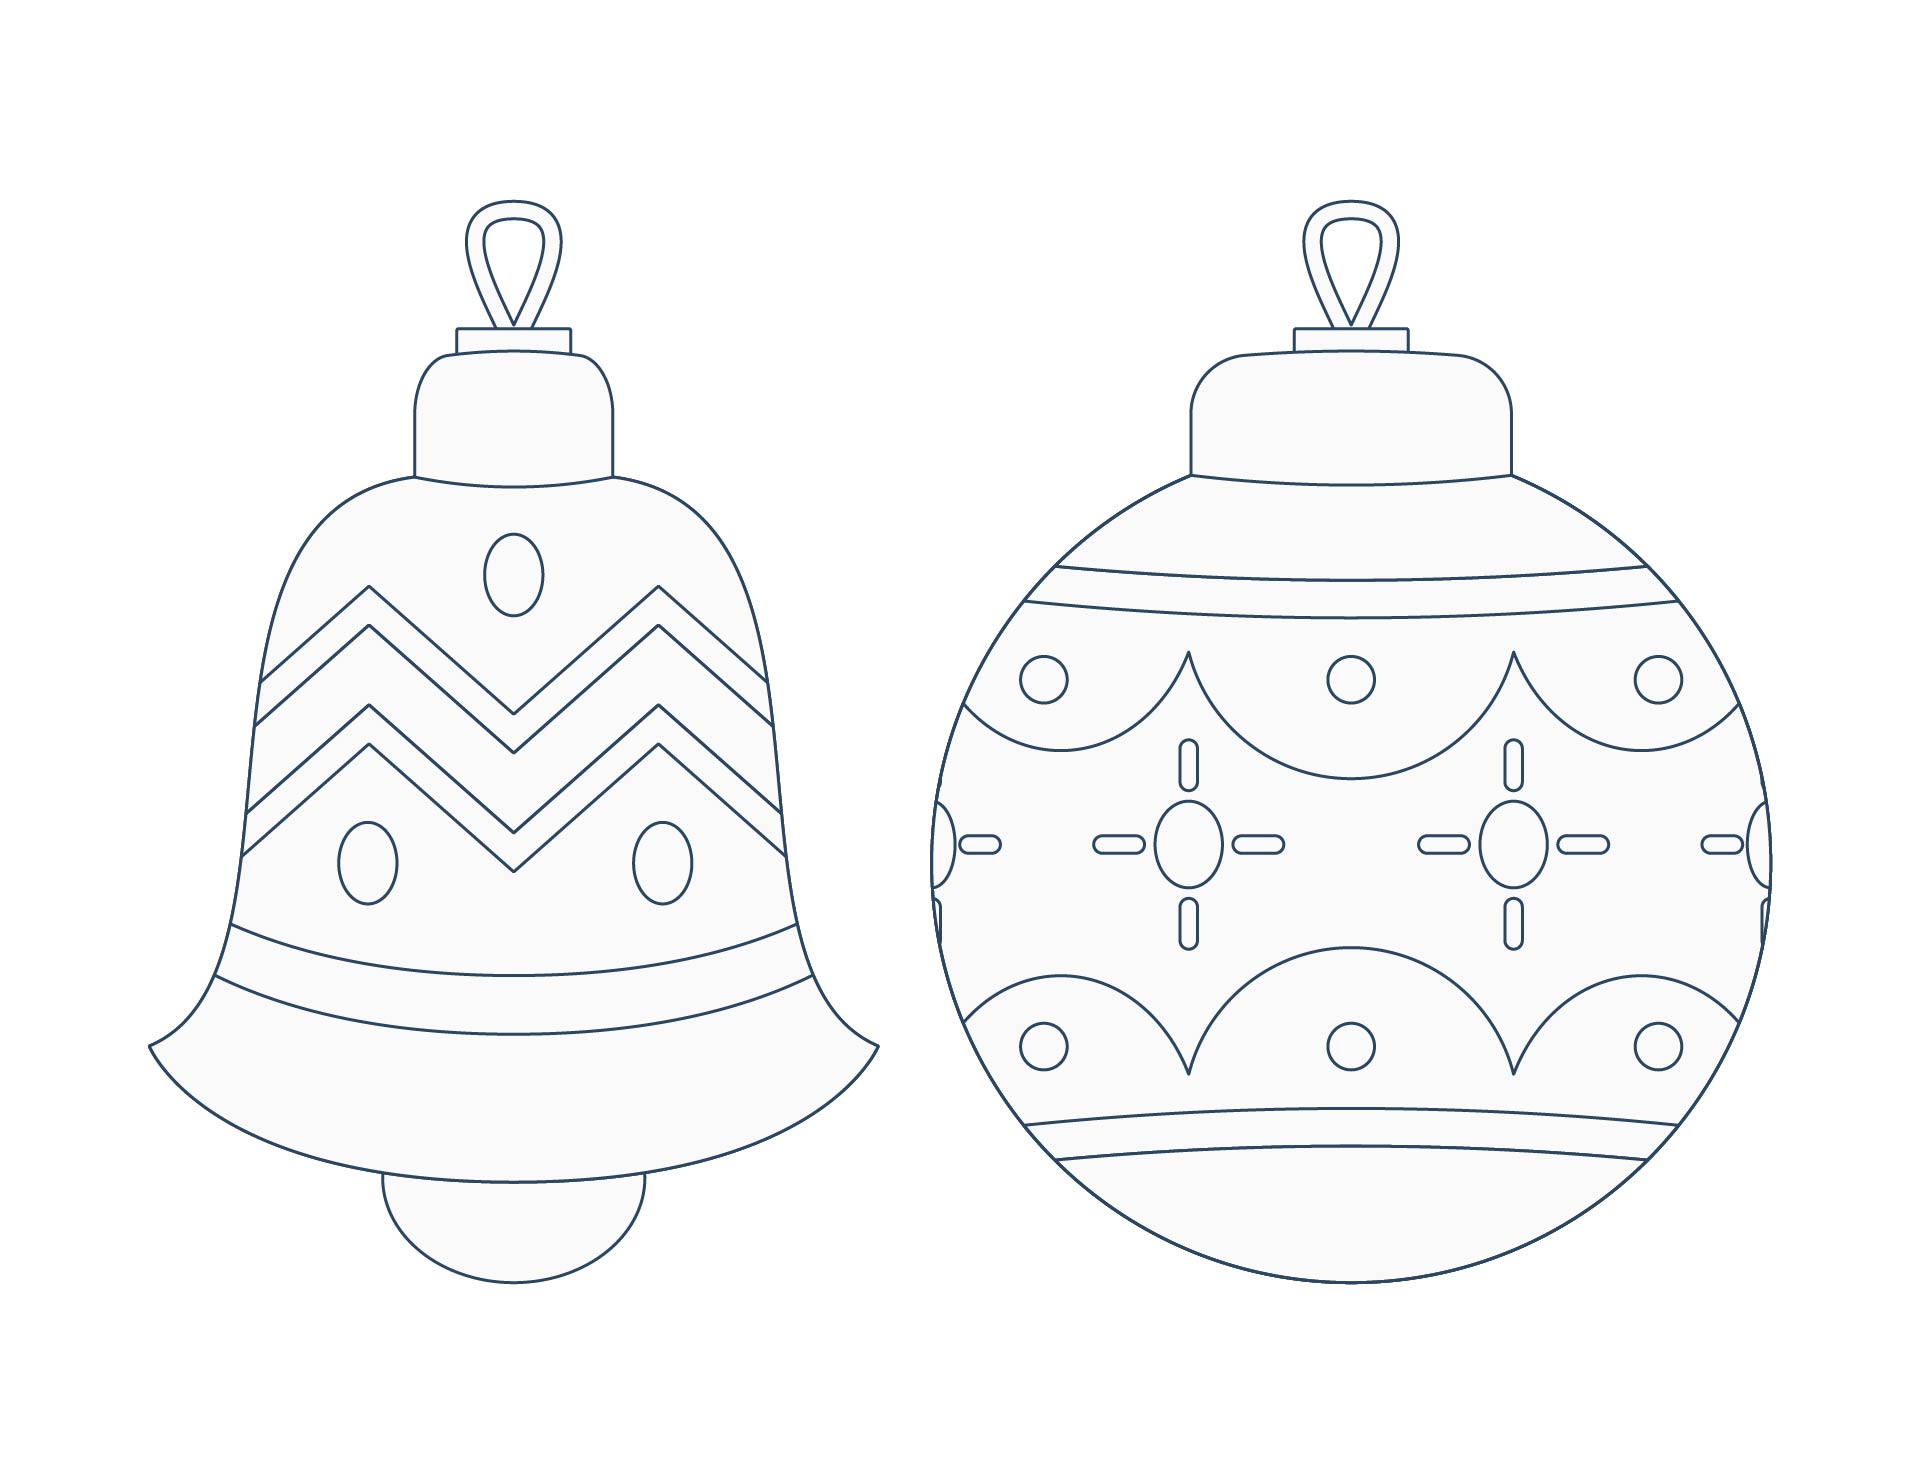 Free Printable Christmas Ornament Patterns To Color